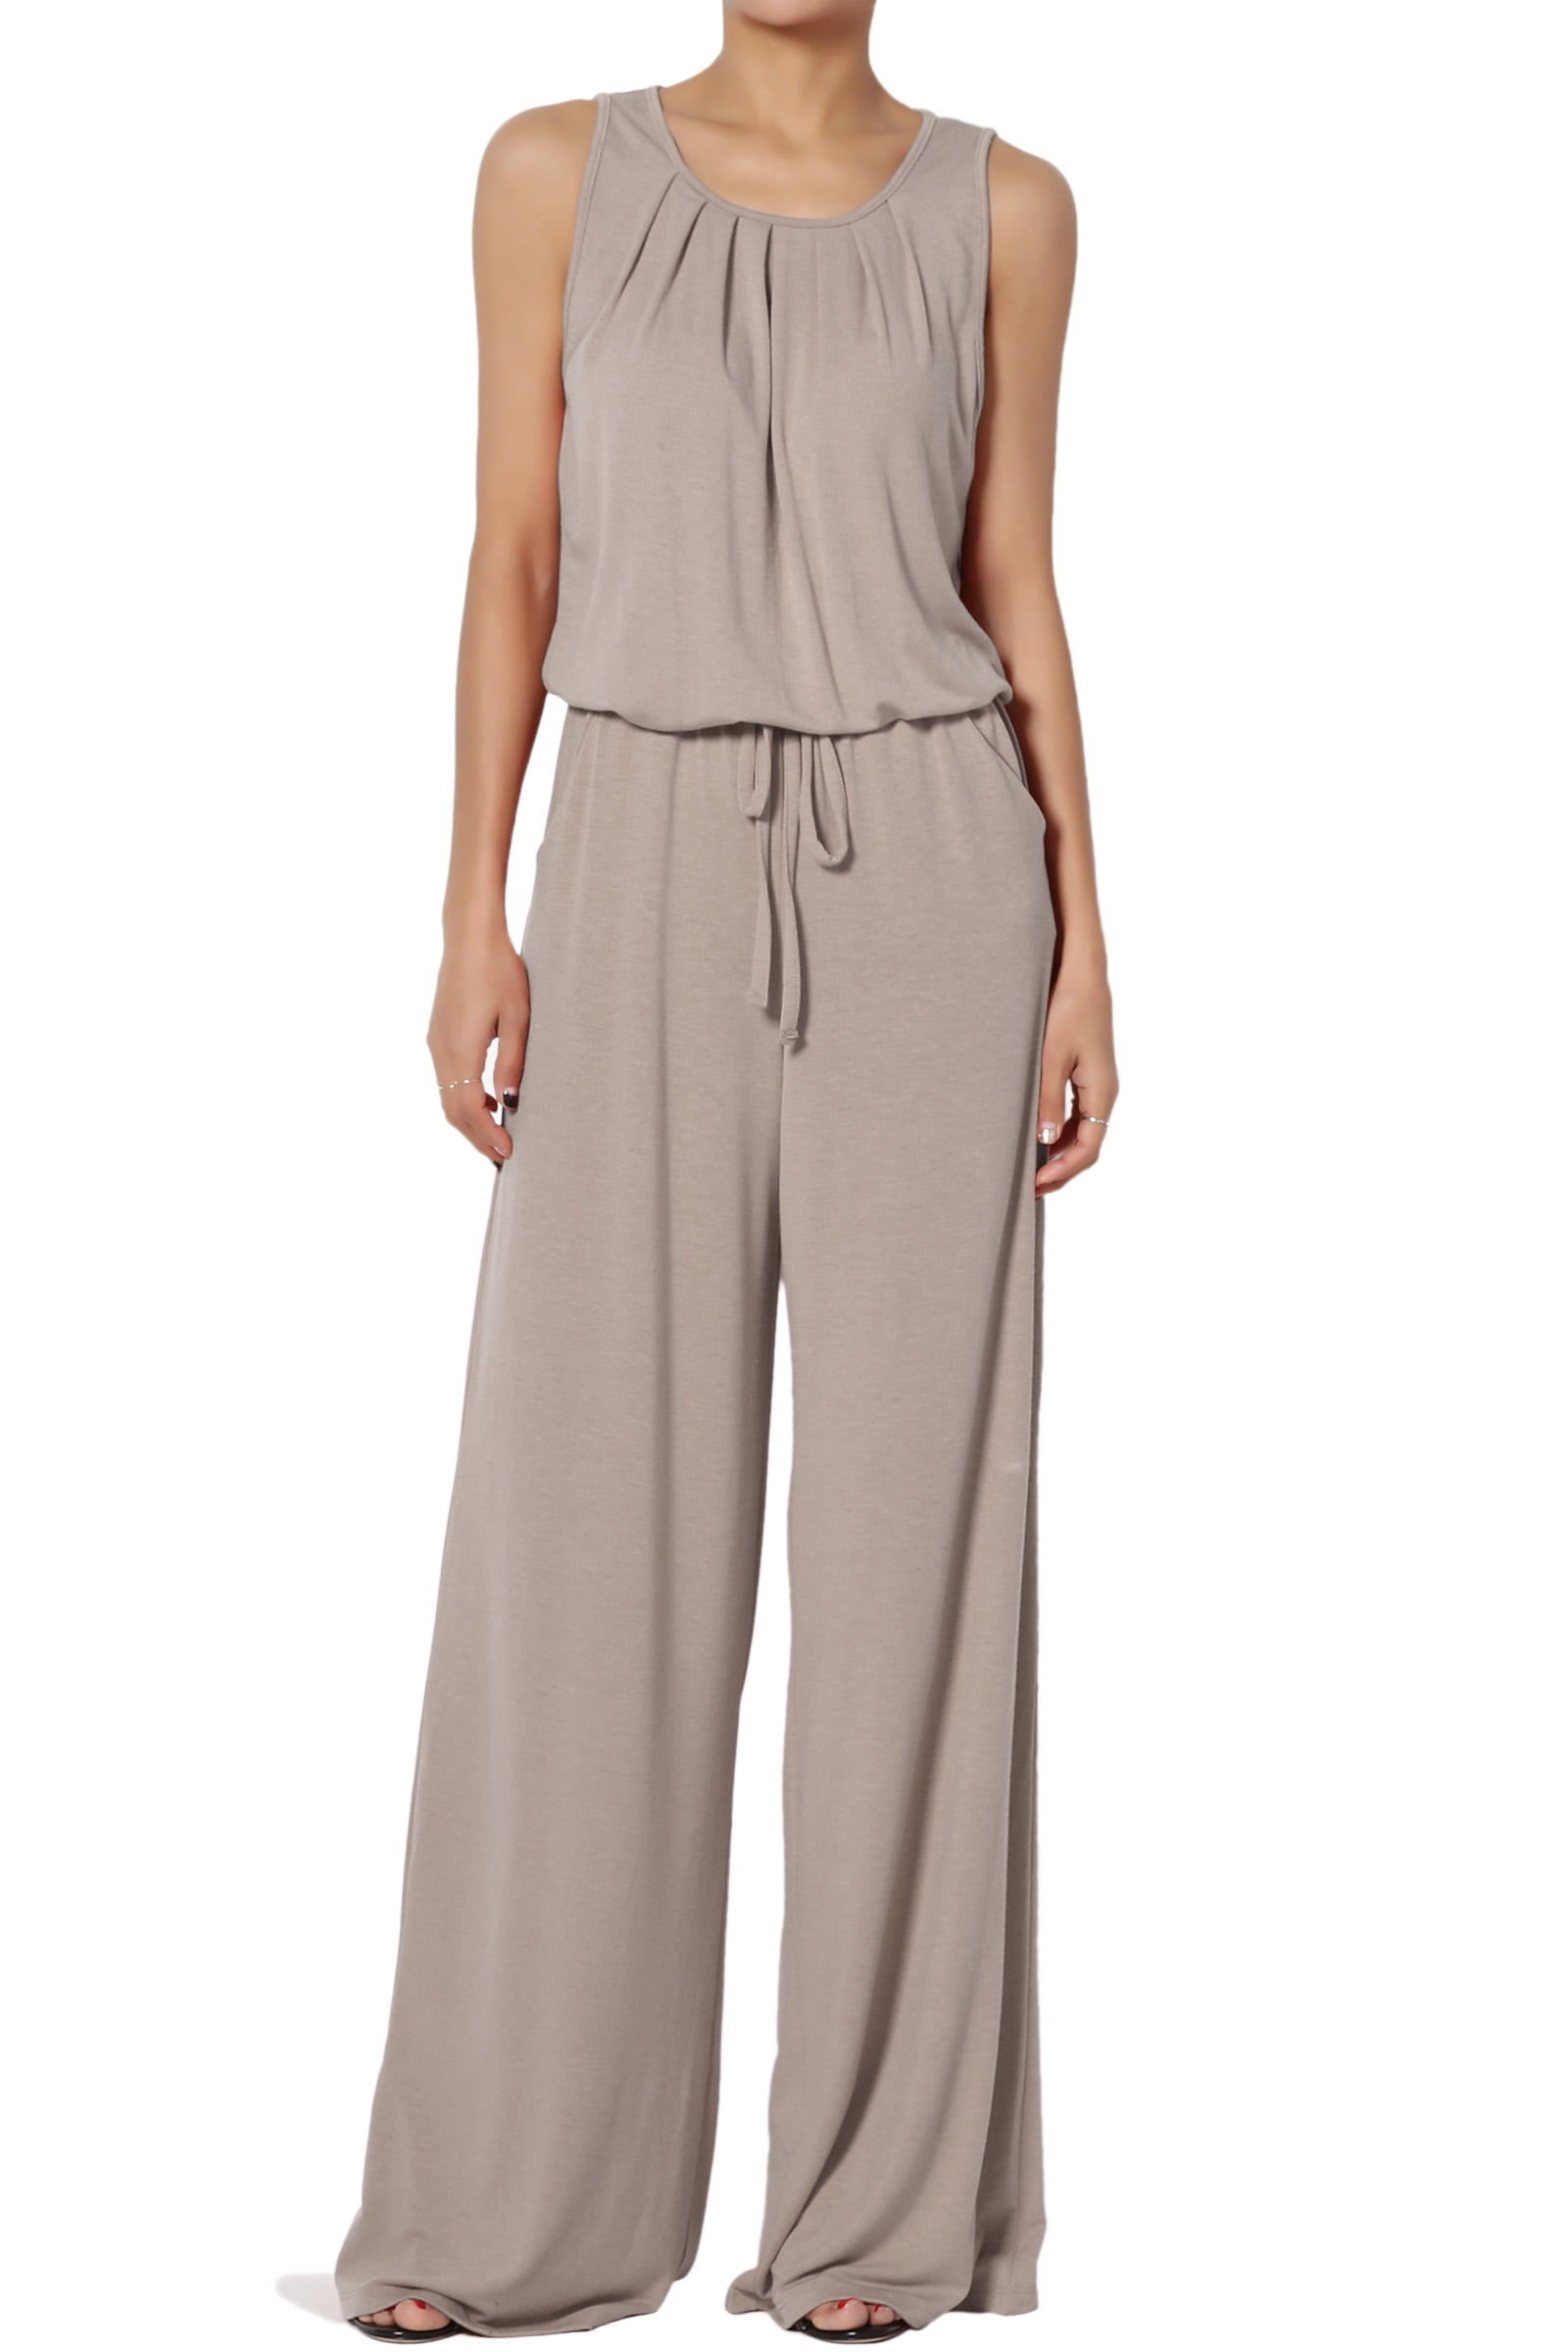 womens jumpsuits in tall sizes